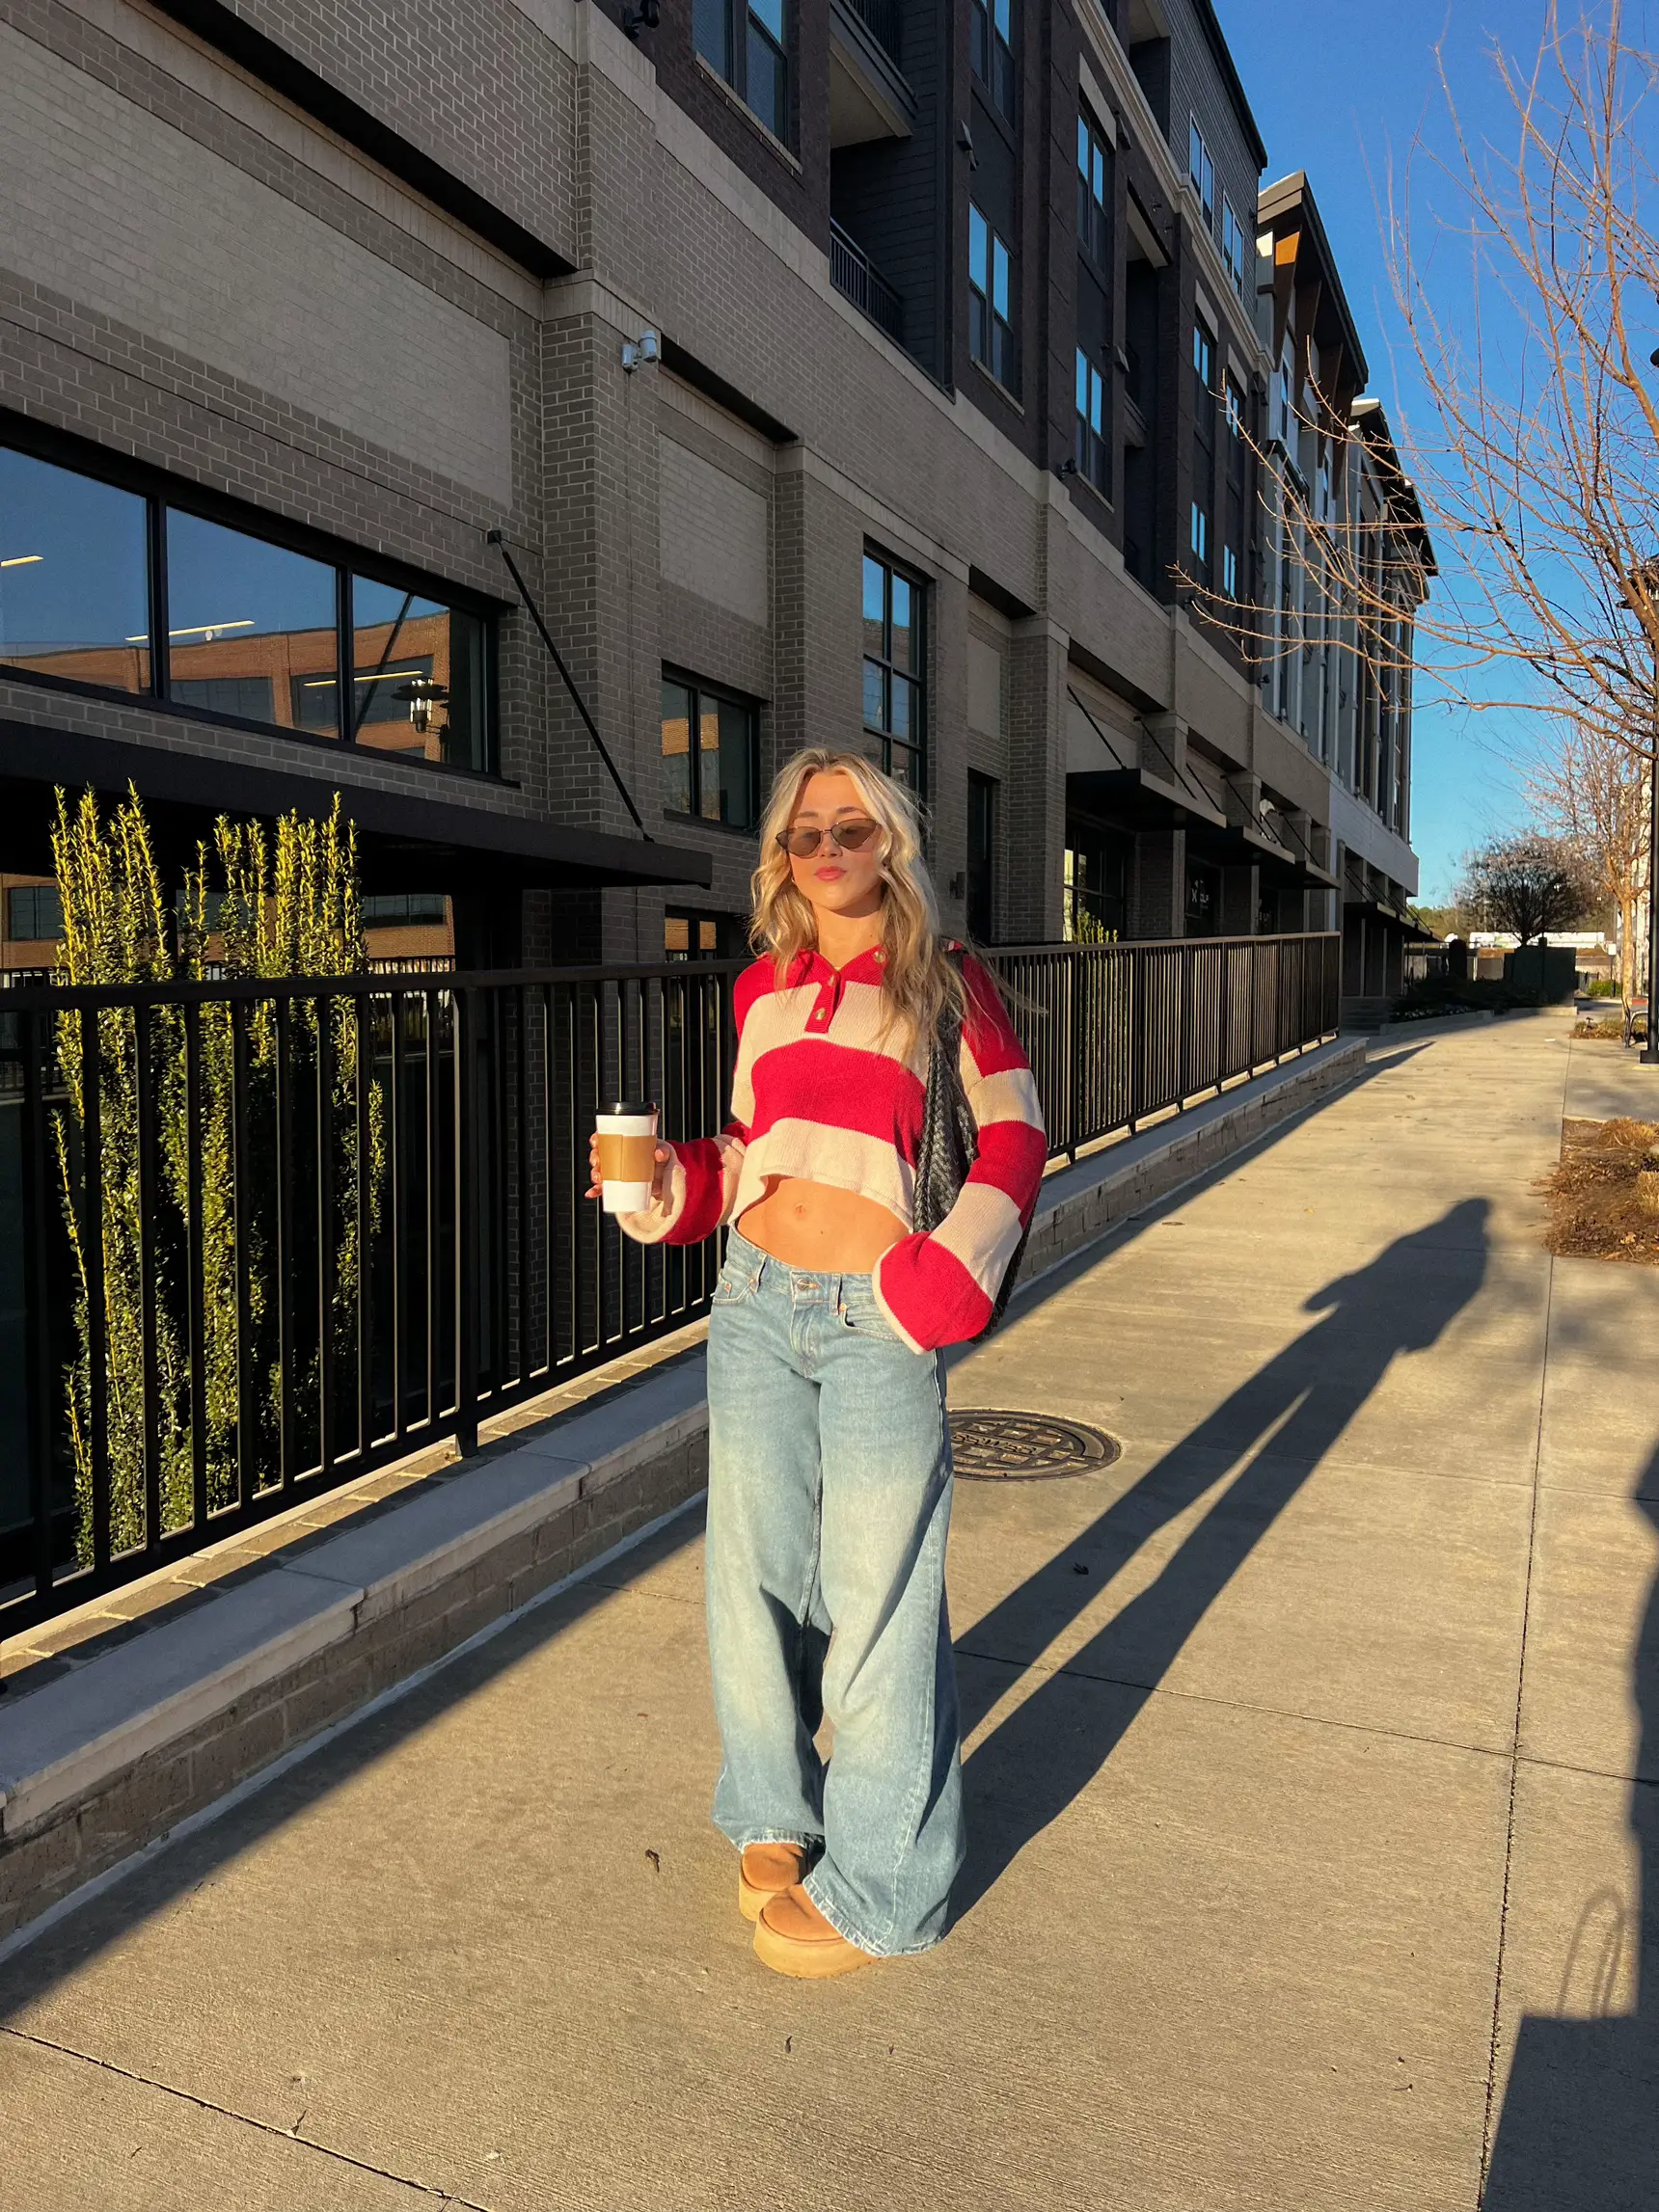 Coffee Date Outfit Ideas ☕️  Gallery posted by Millicentrose